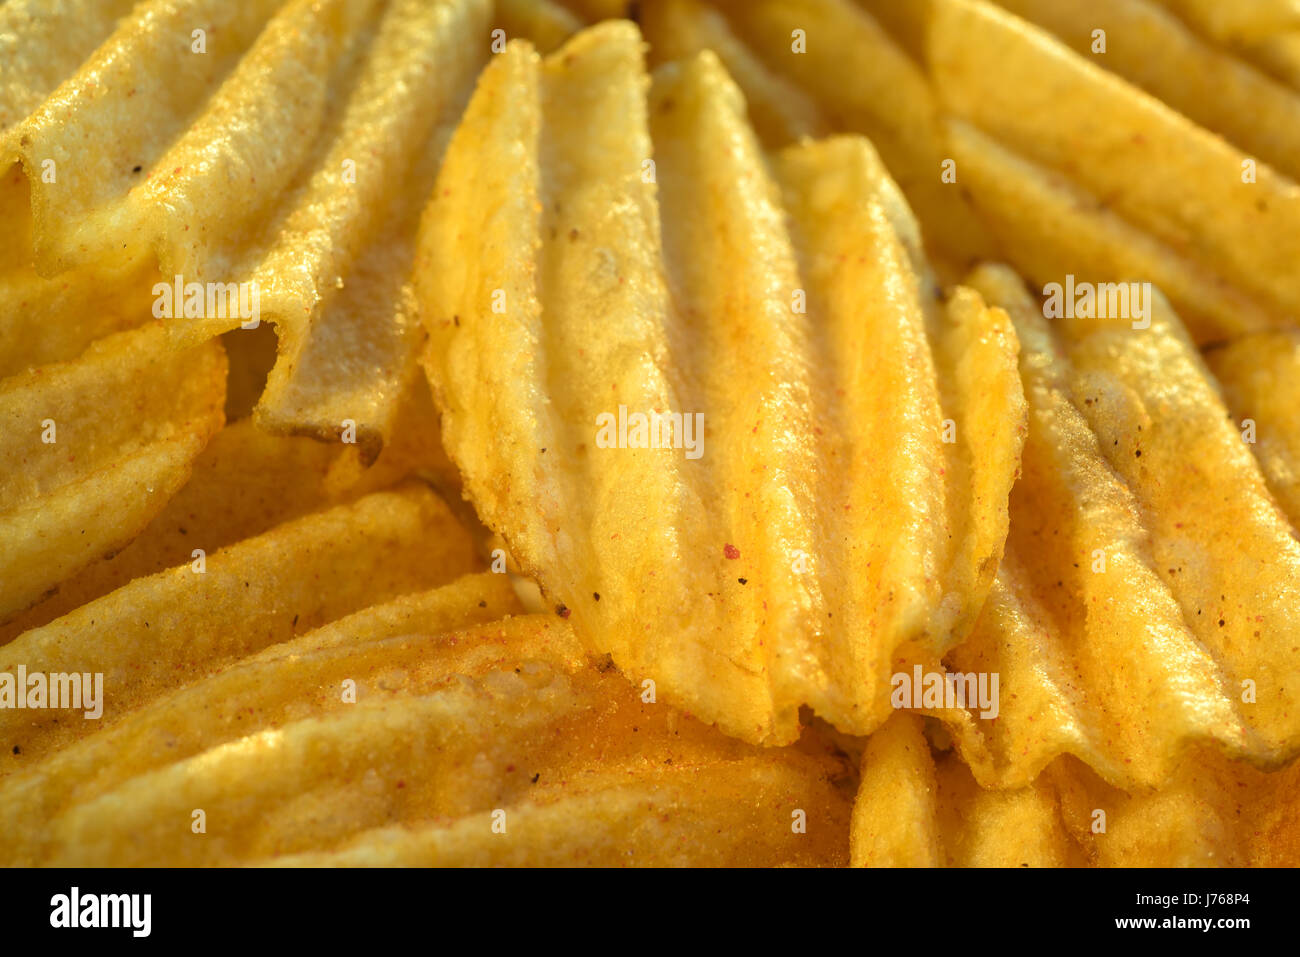 Chips pattern. Yellow salted potato chips as background. Chips texture studio photo. Stock Photo